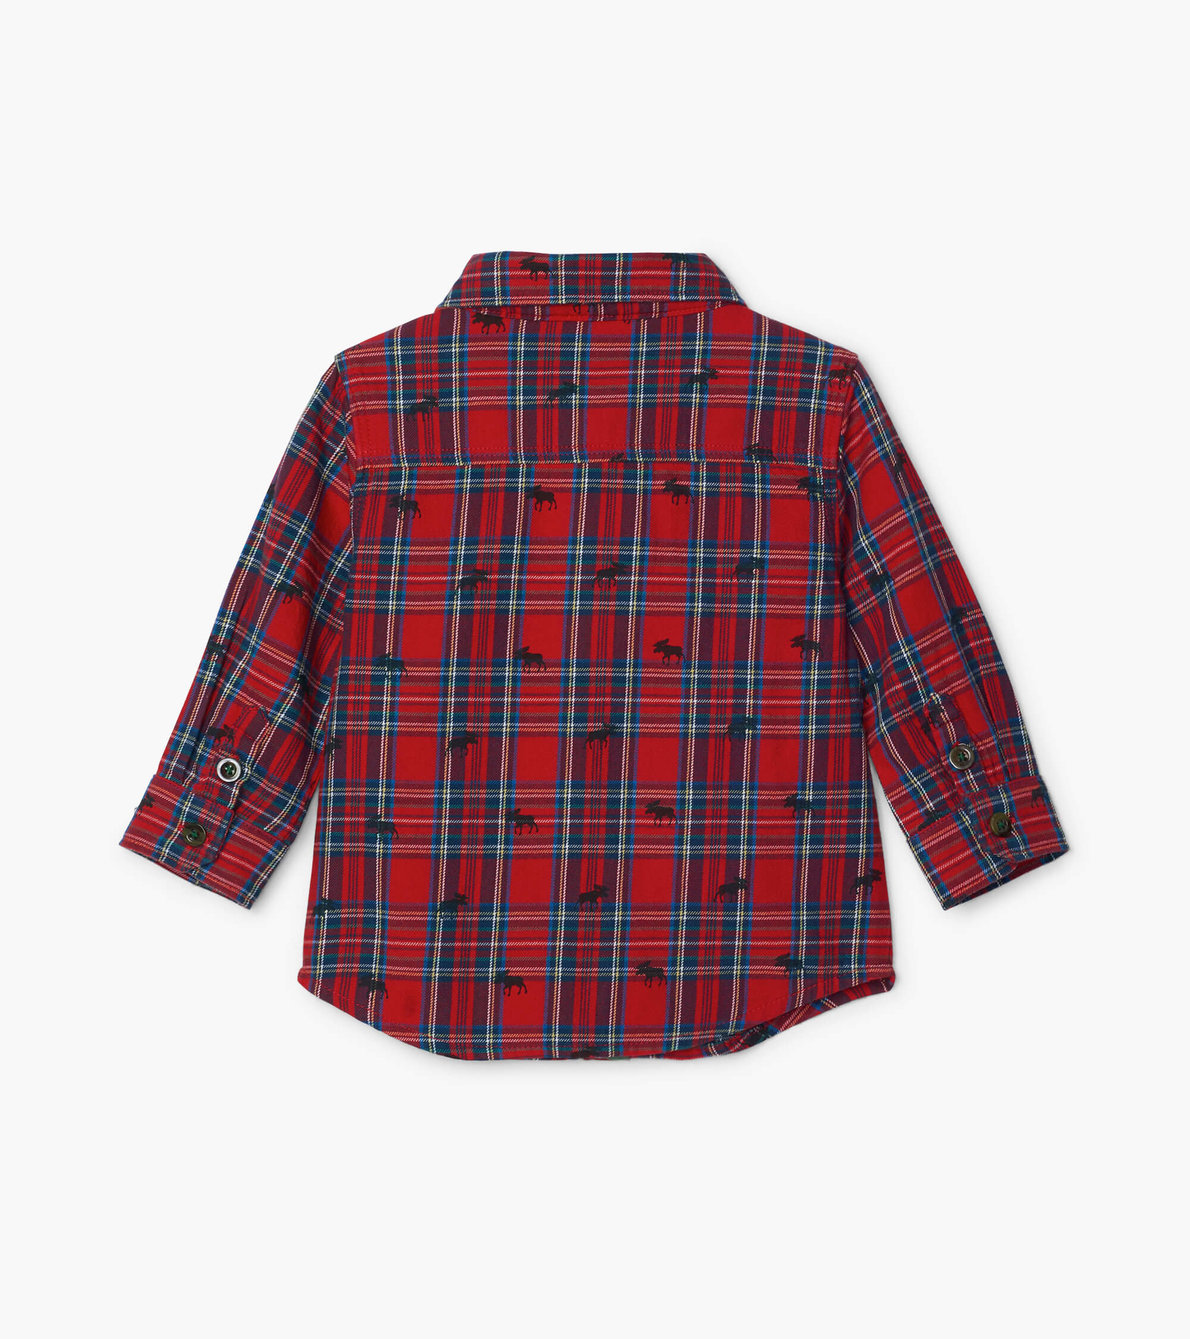 View larger image of Holiday Plaid Moose Baby Button Down Shirt